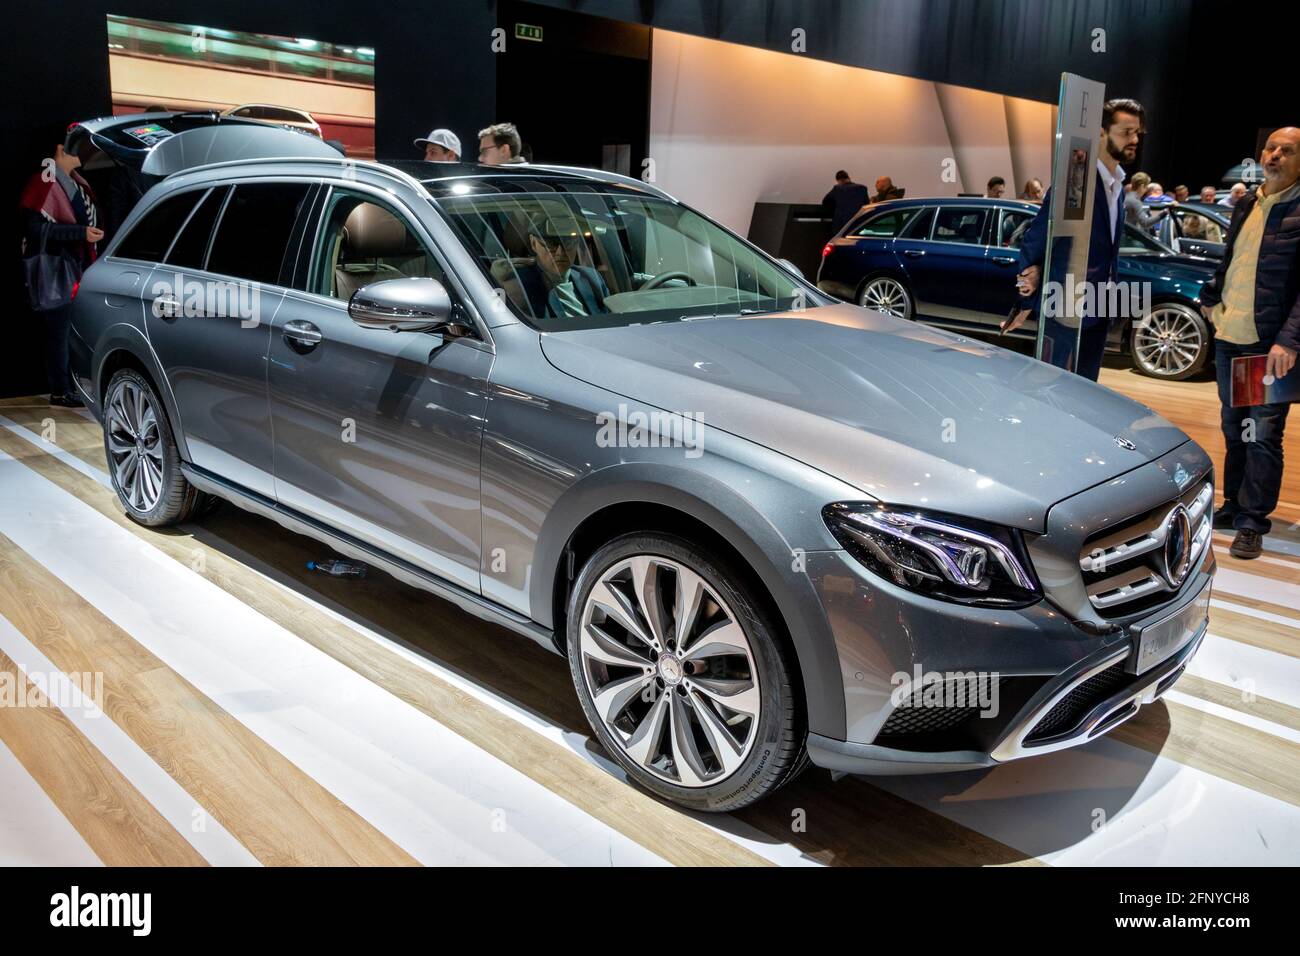 Mercedes Benz E220d station wagon car showcased at the Brussels Expo Autosalon motor show. Belgium - January 19, 2017 Stock Photo